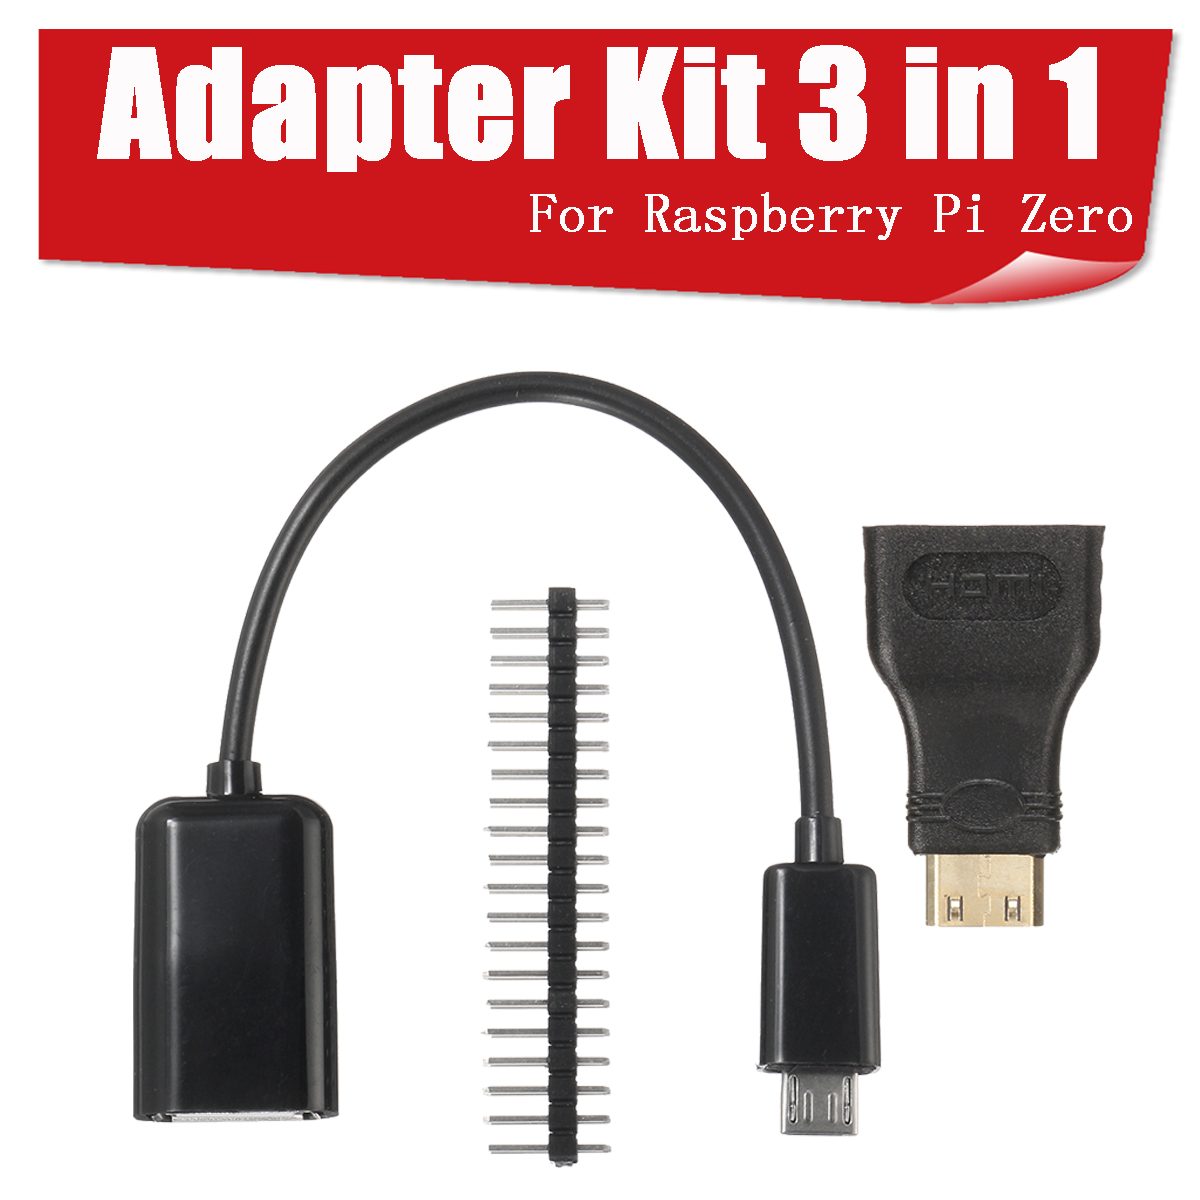 3 in 1 Mini HD to HD Adapter+Micro USB to USB Female Power Cable+40P Pin Kits For Raspberry Pi Zero 32